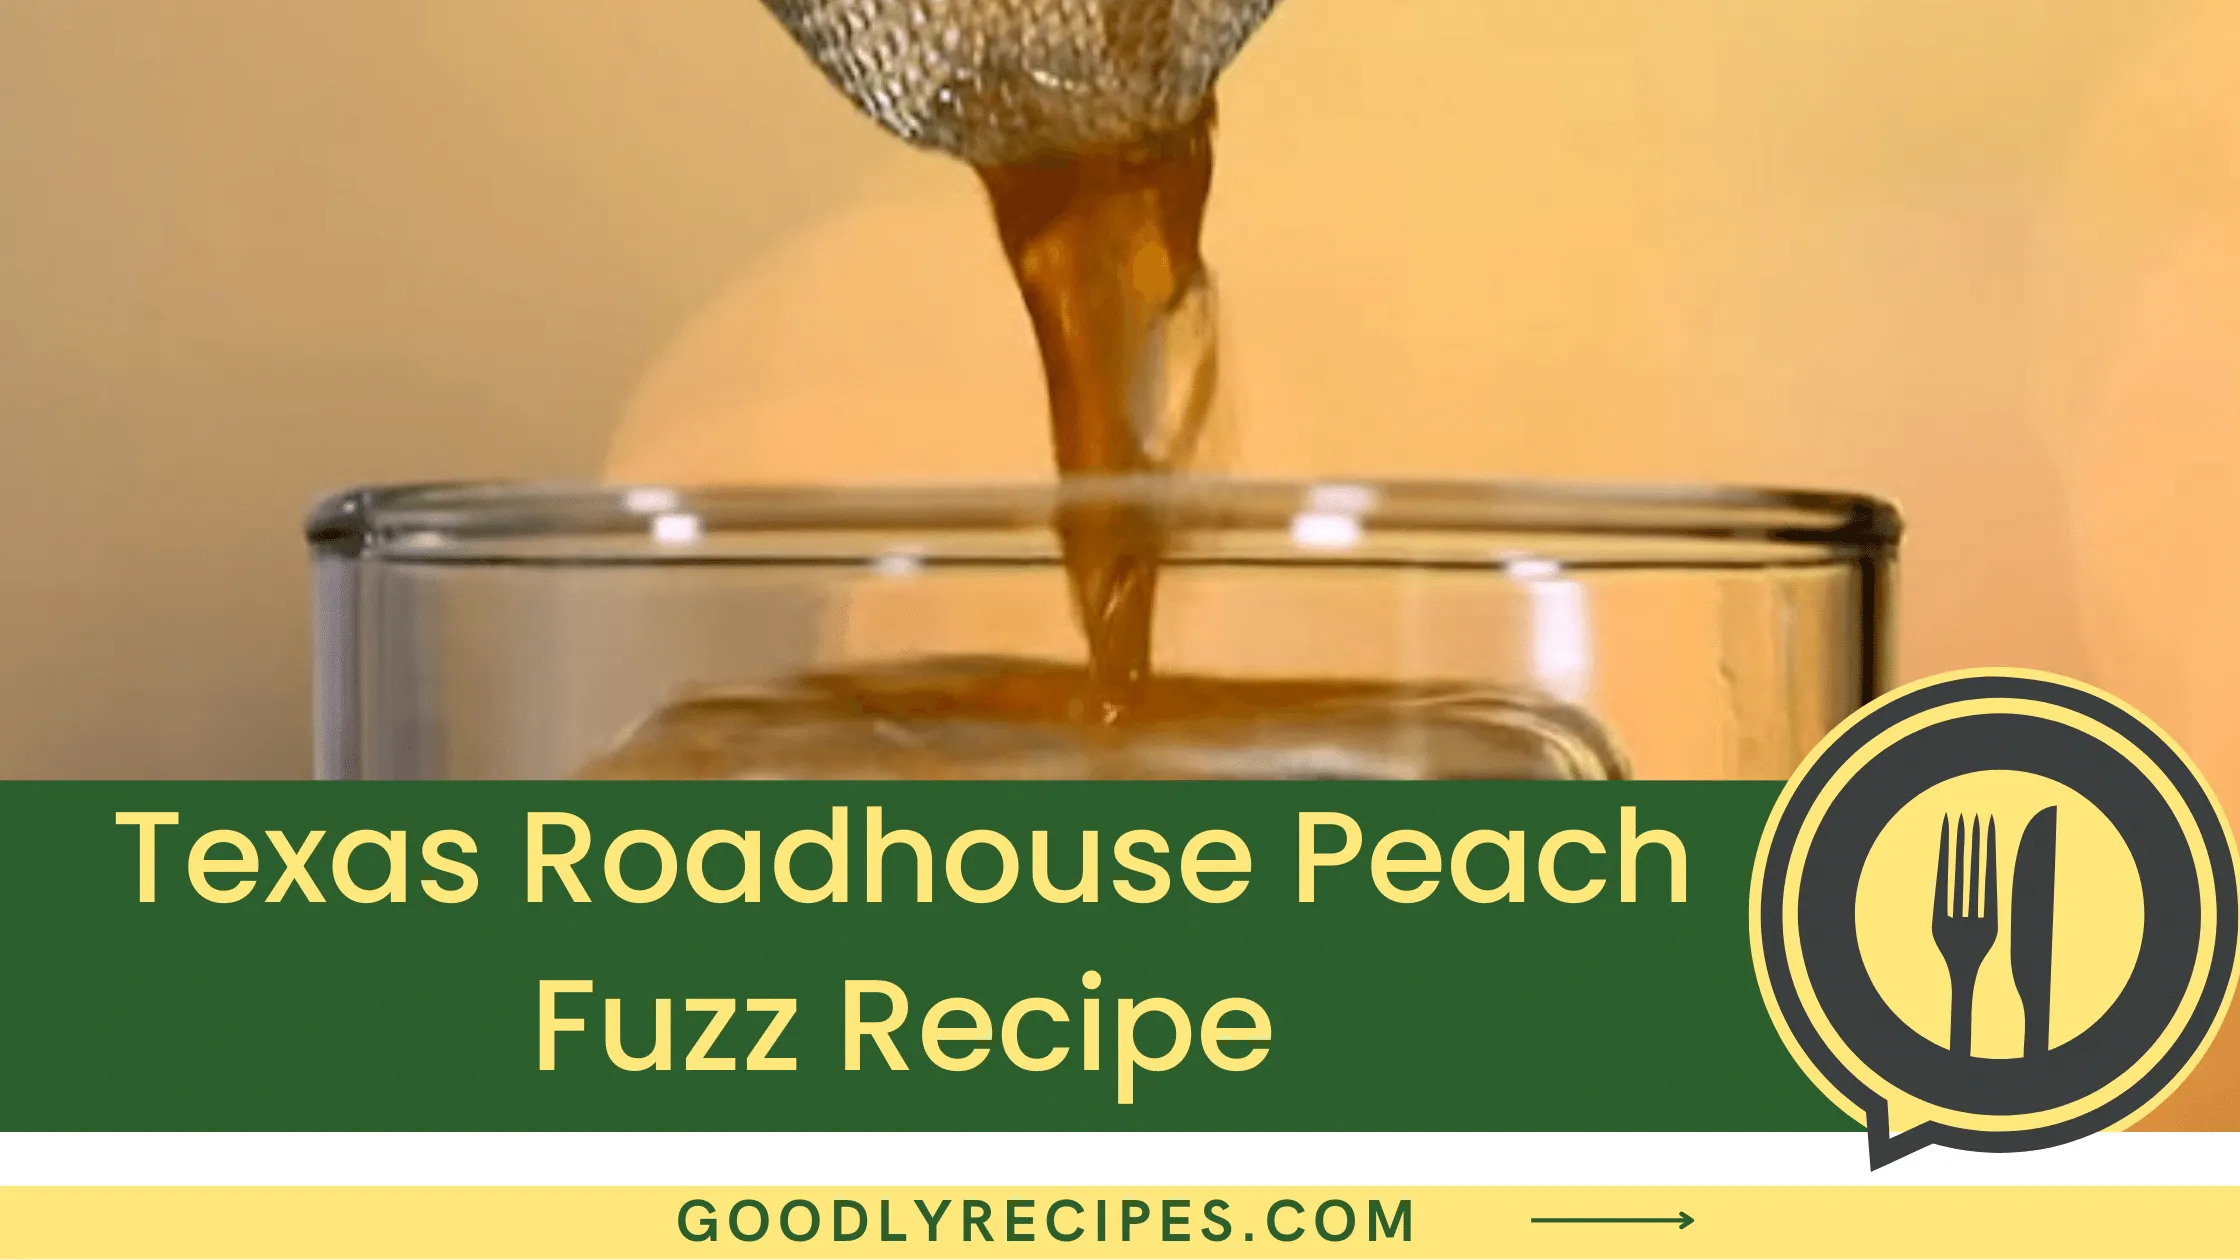 Texas Roadhouse Peach Fuzz Recipe - For Food Lovers